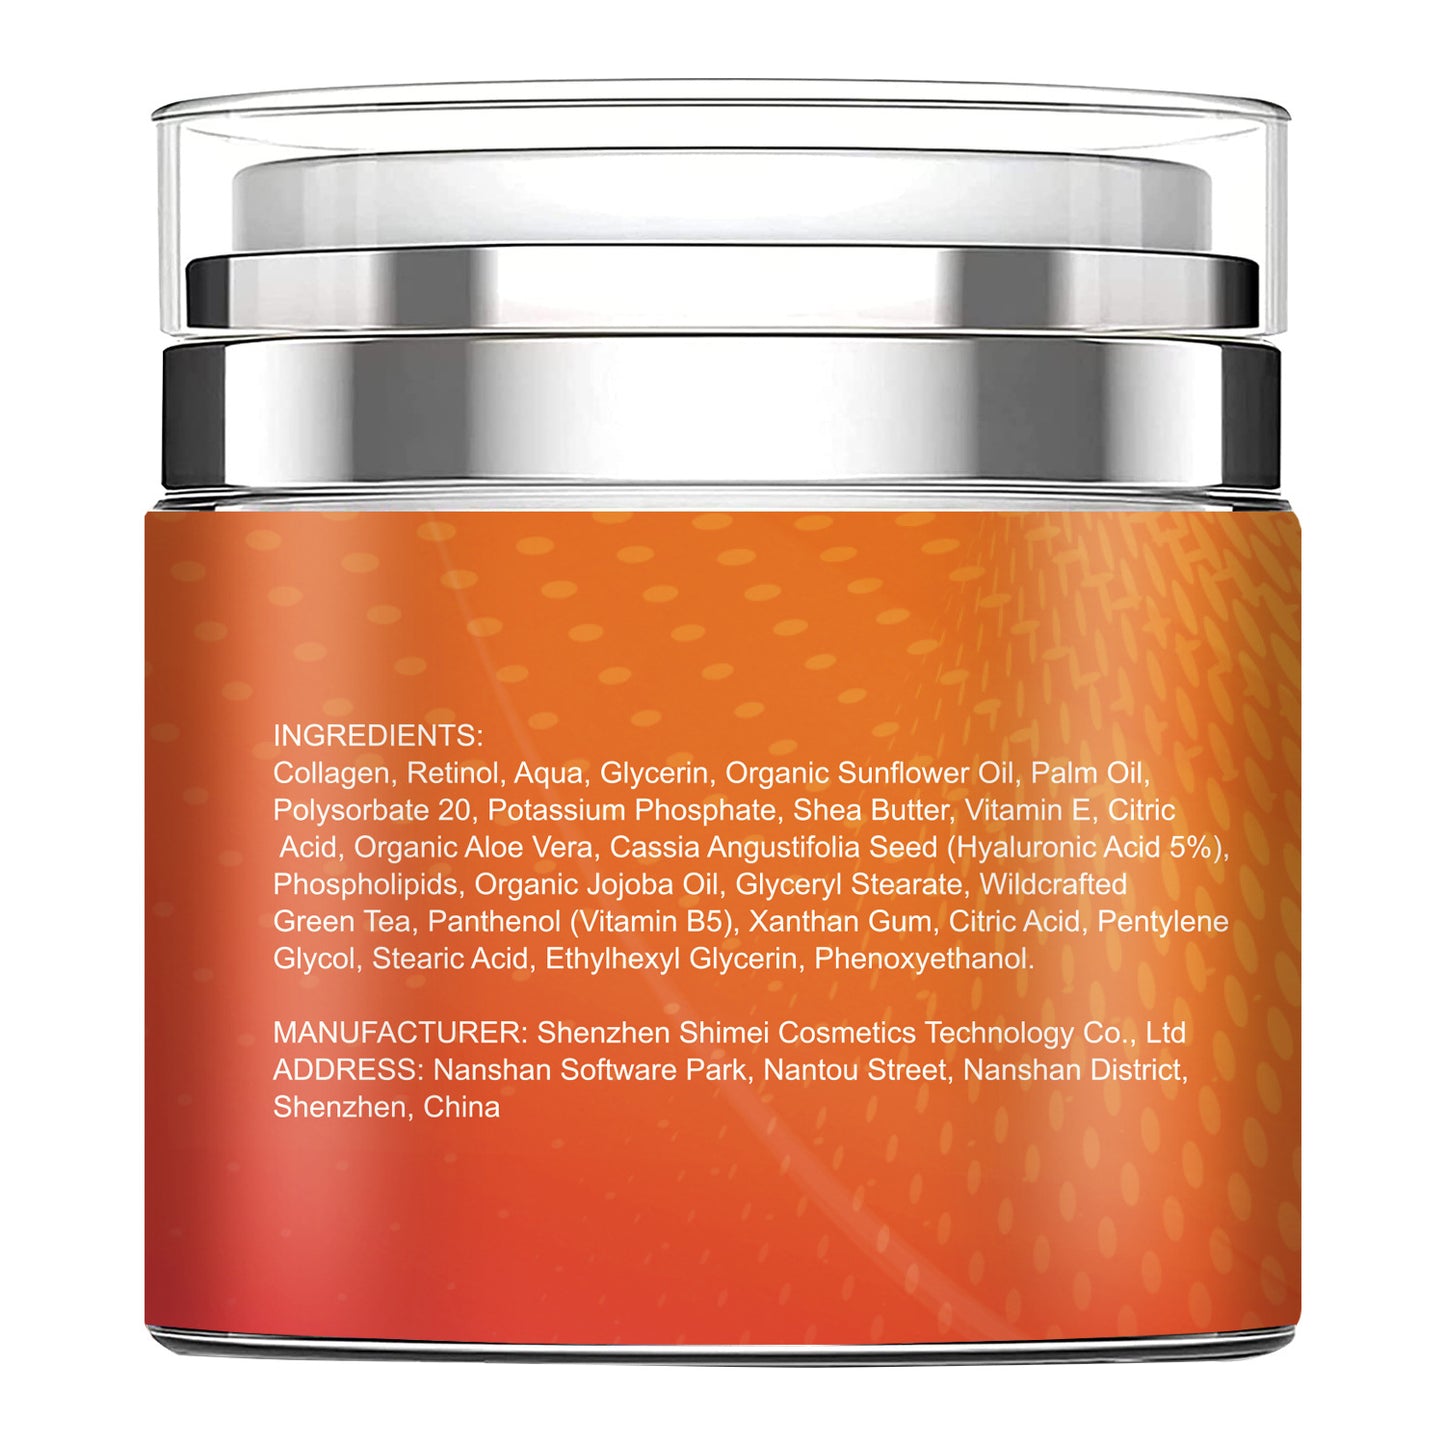 Wholesale Day and Night Retinol Firming Revitalizing Cream, Fine Lines, Hyperpigmentation for Dry Skin 303